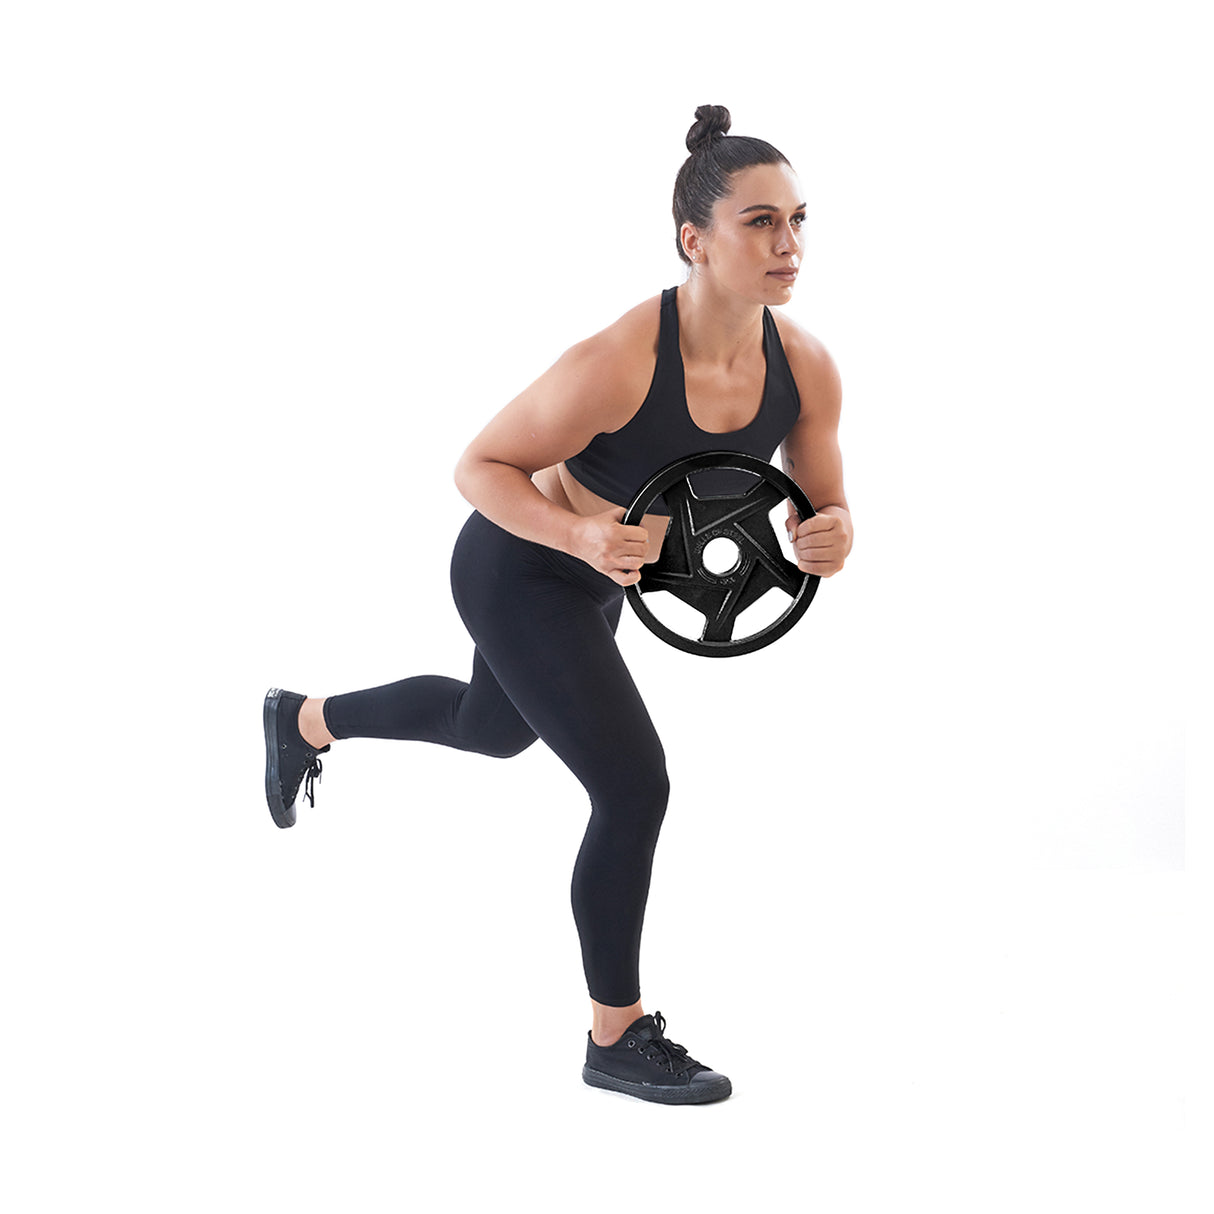 Female athlete doing single stance RDL using Black Mighty Grip Olympic Weight Plates